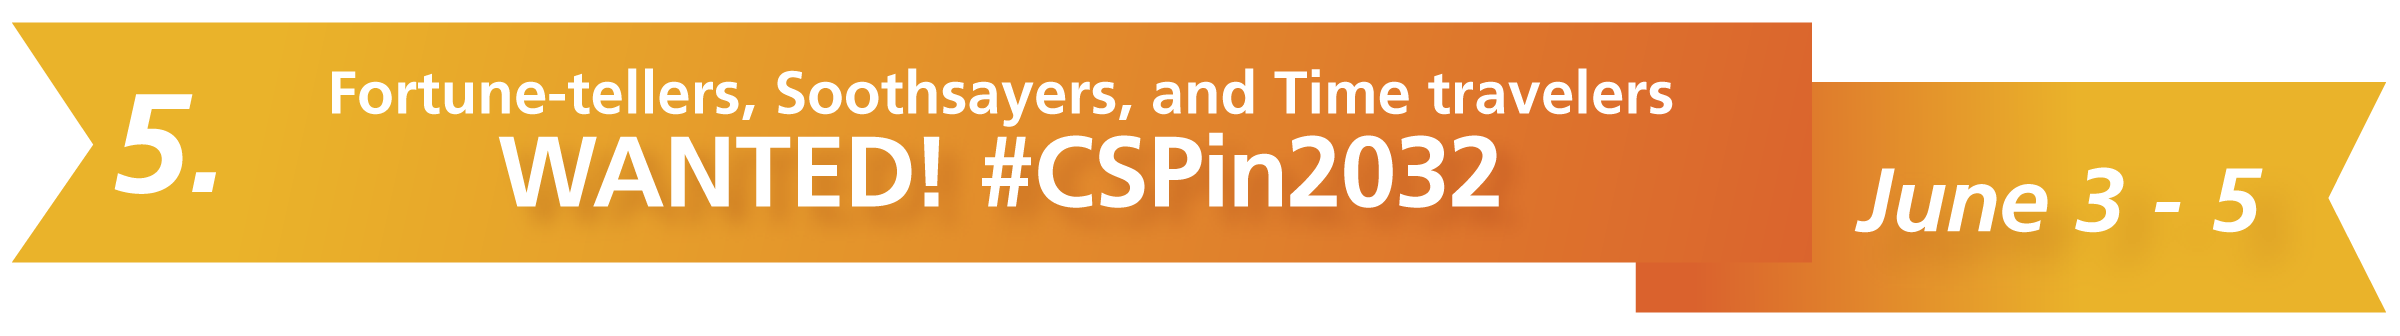 5. Fortune-tellers, Soothsayers, and Time travelers WANTED! #CSPin2032 June 3 — 5